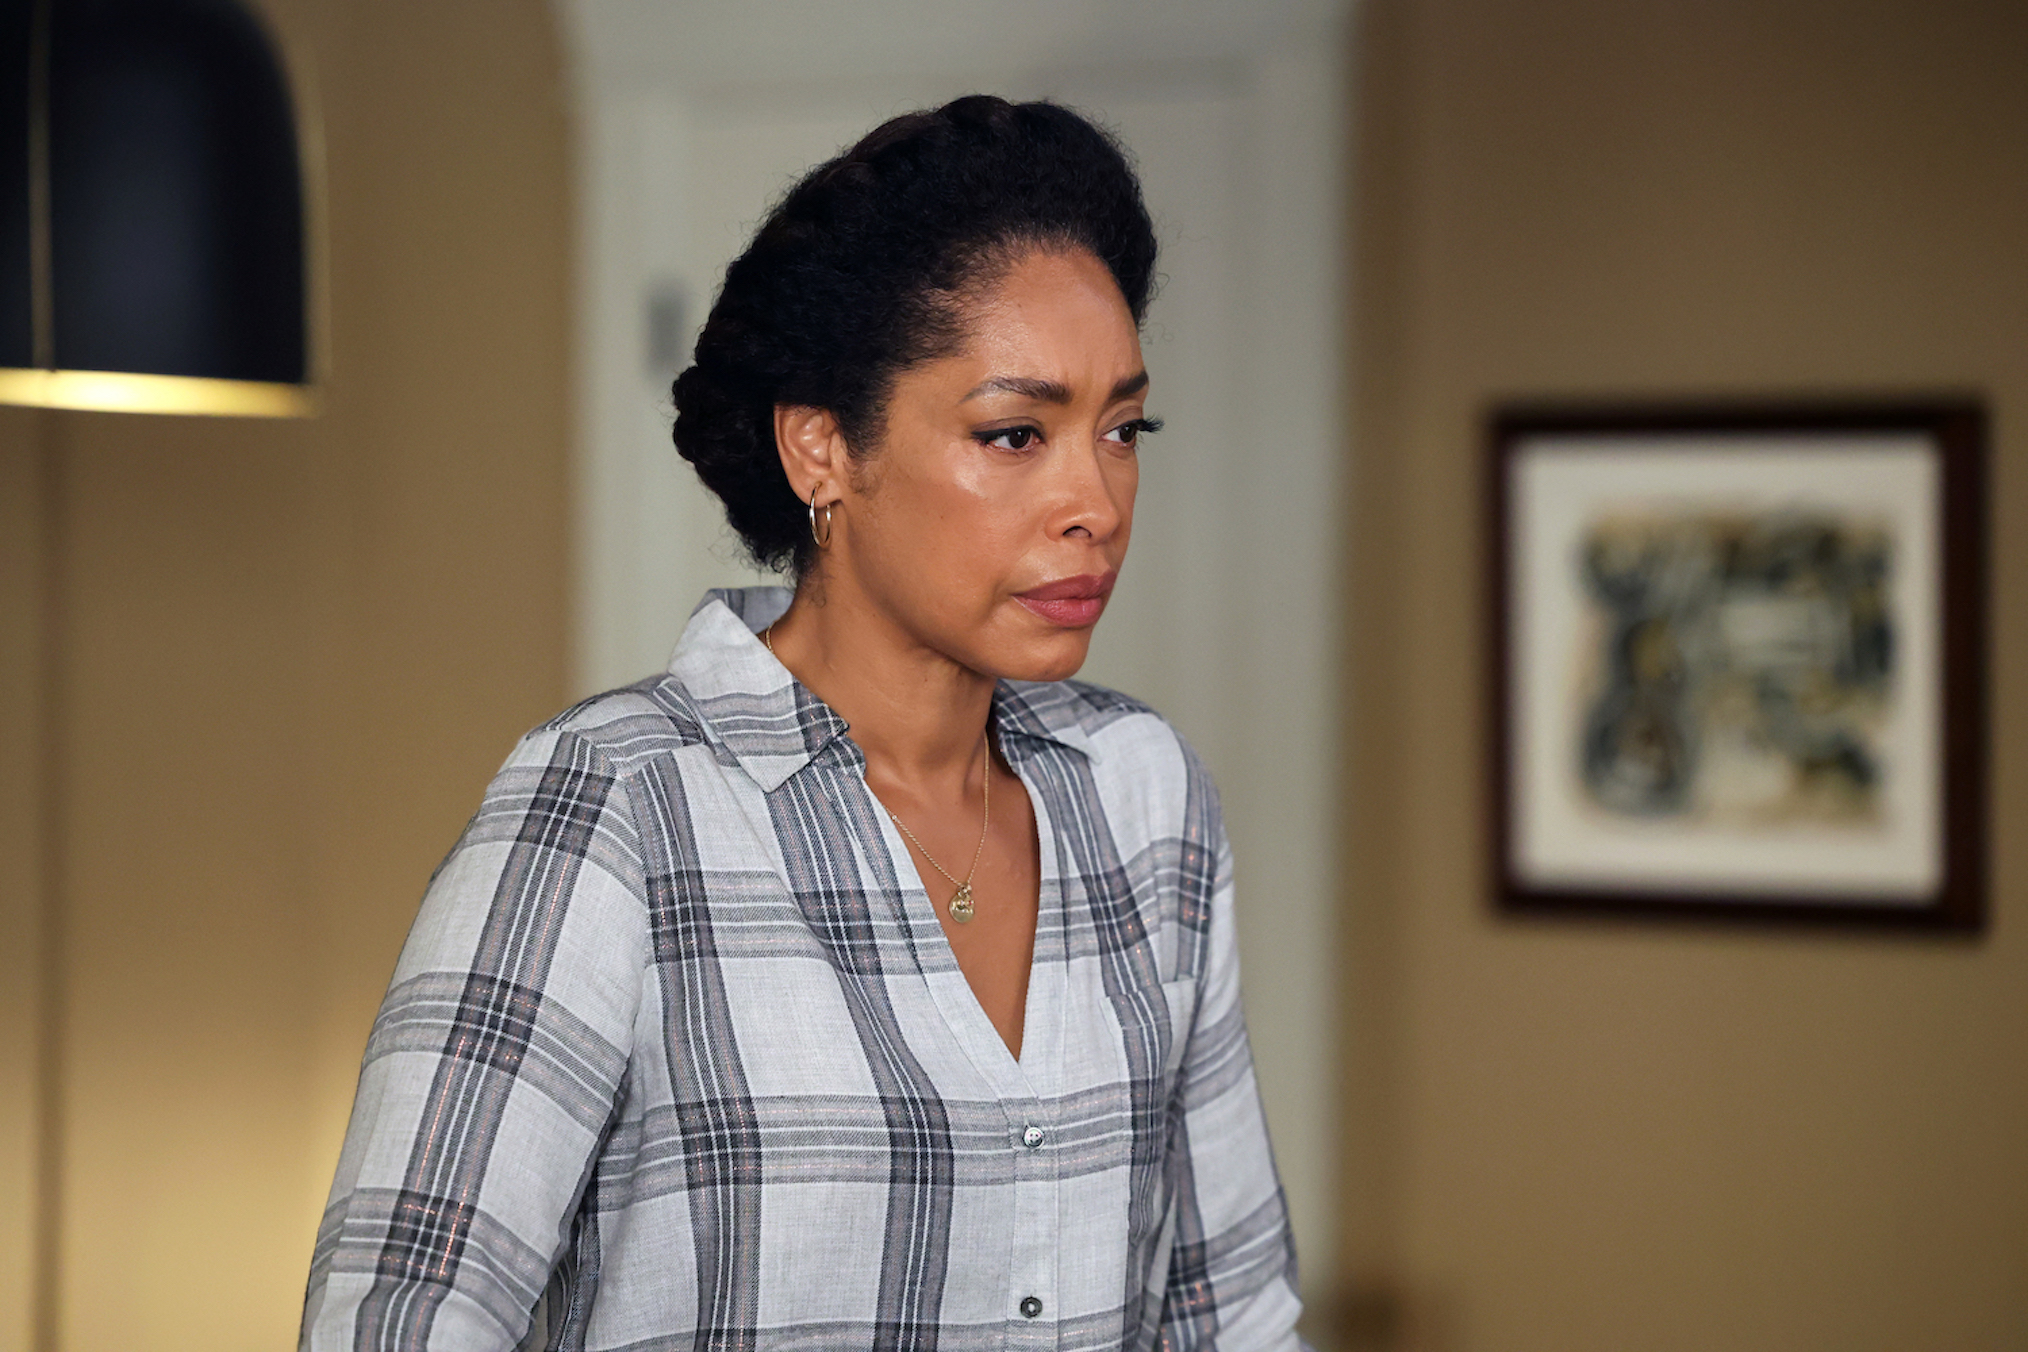 9-1-1: Lone Star's Gina Torres on Tommy's 'Fascinating' Reaction to That  Heartbreaking Shocker